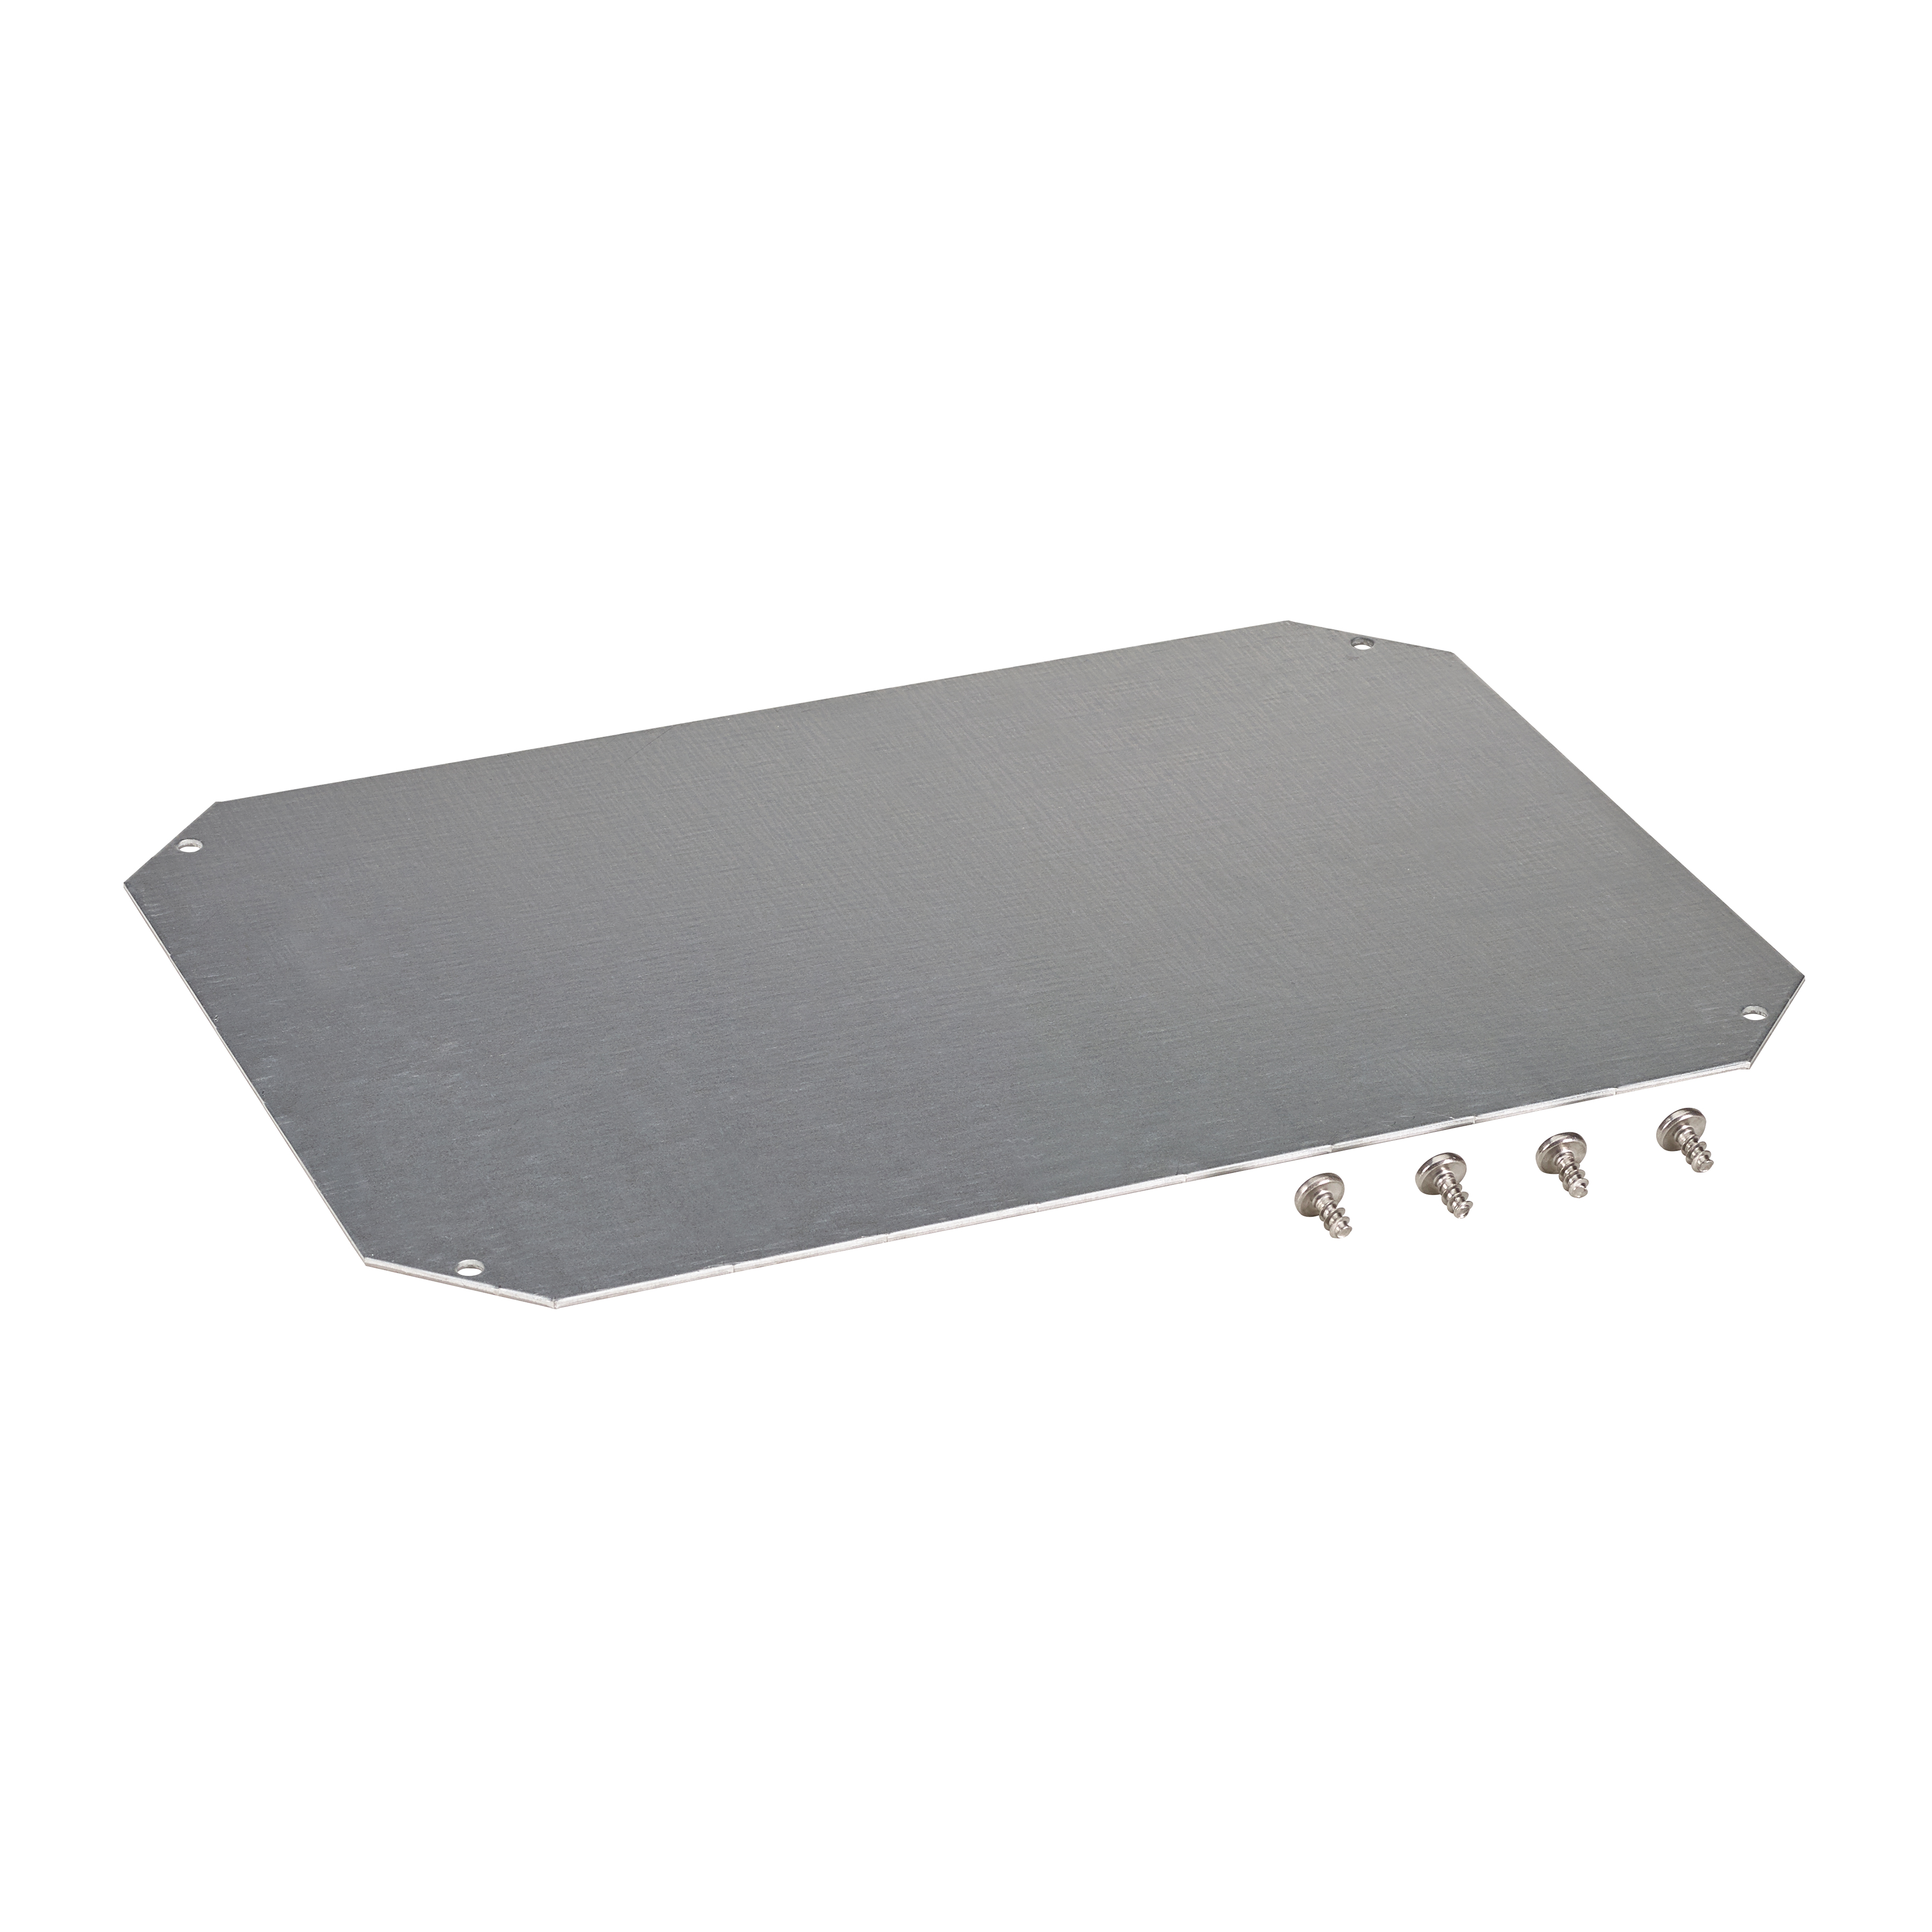 MPS ARCA 4030 Mounting plate